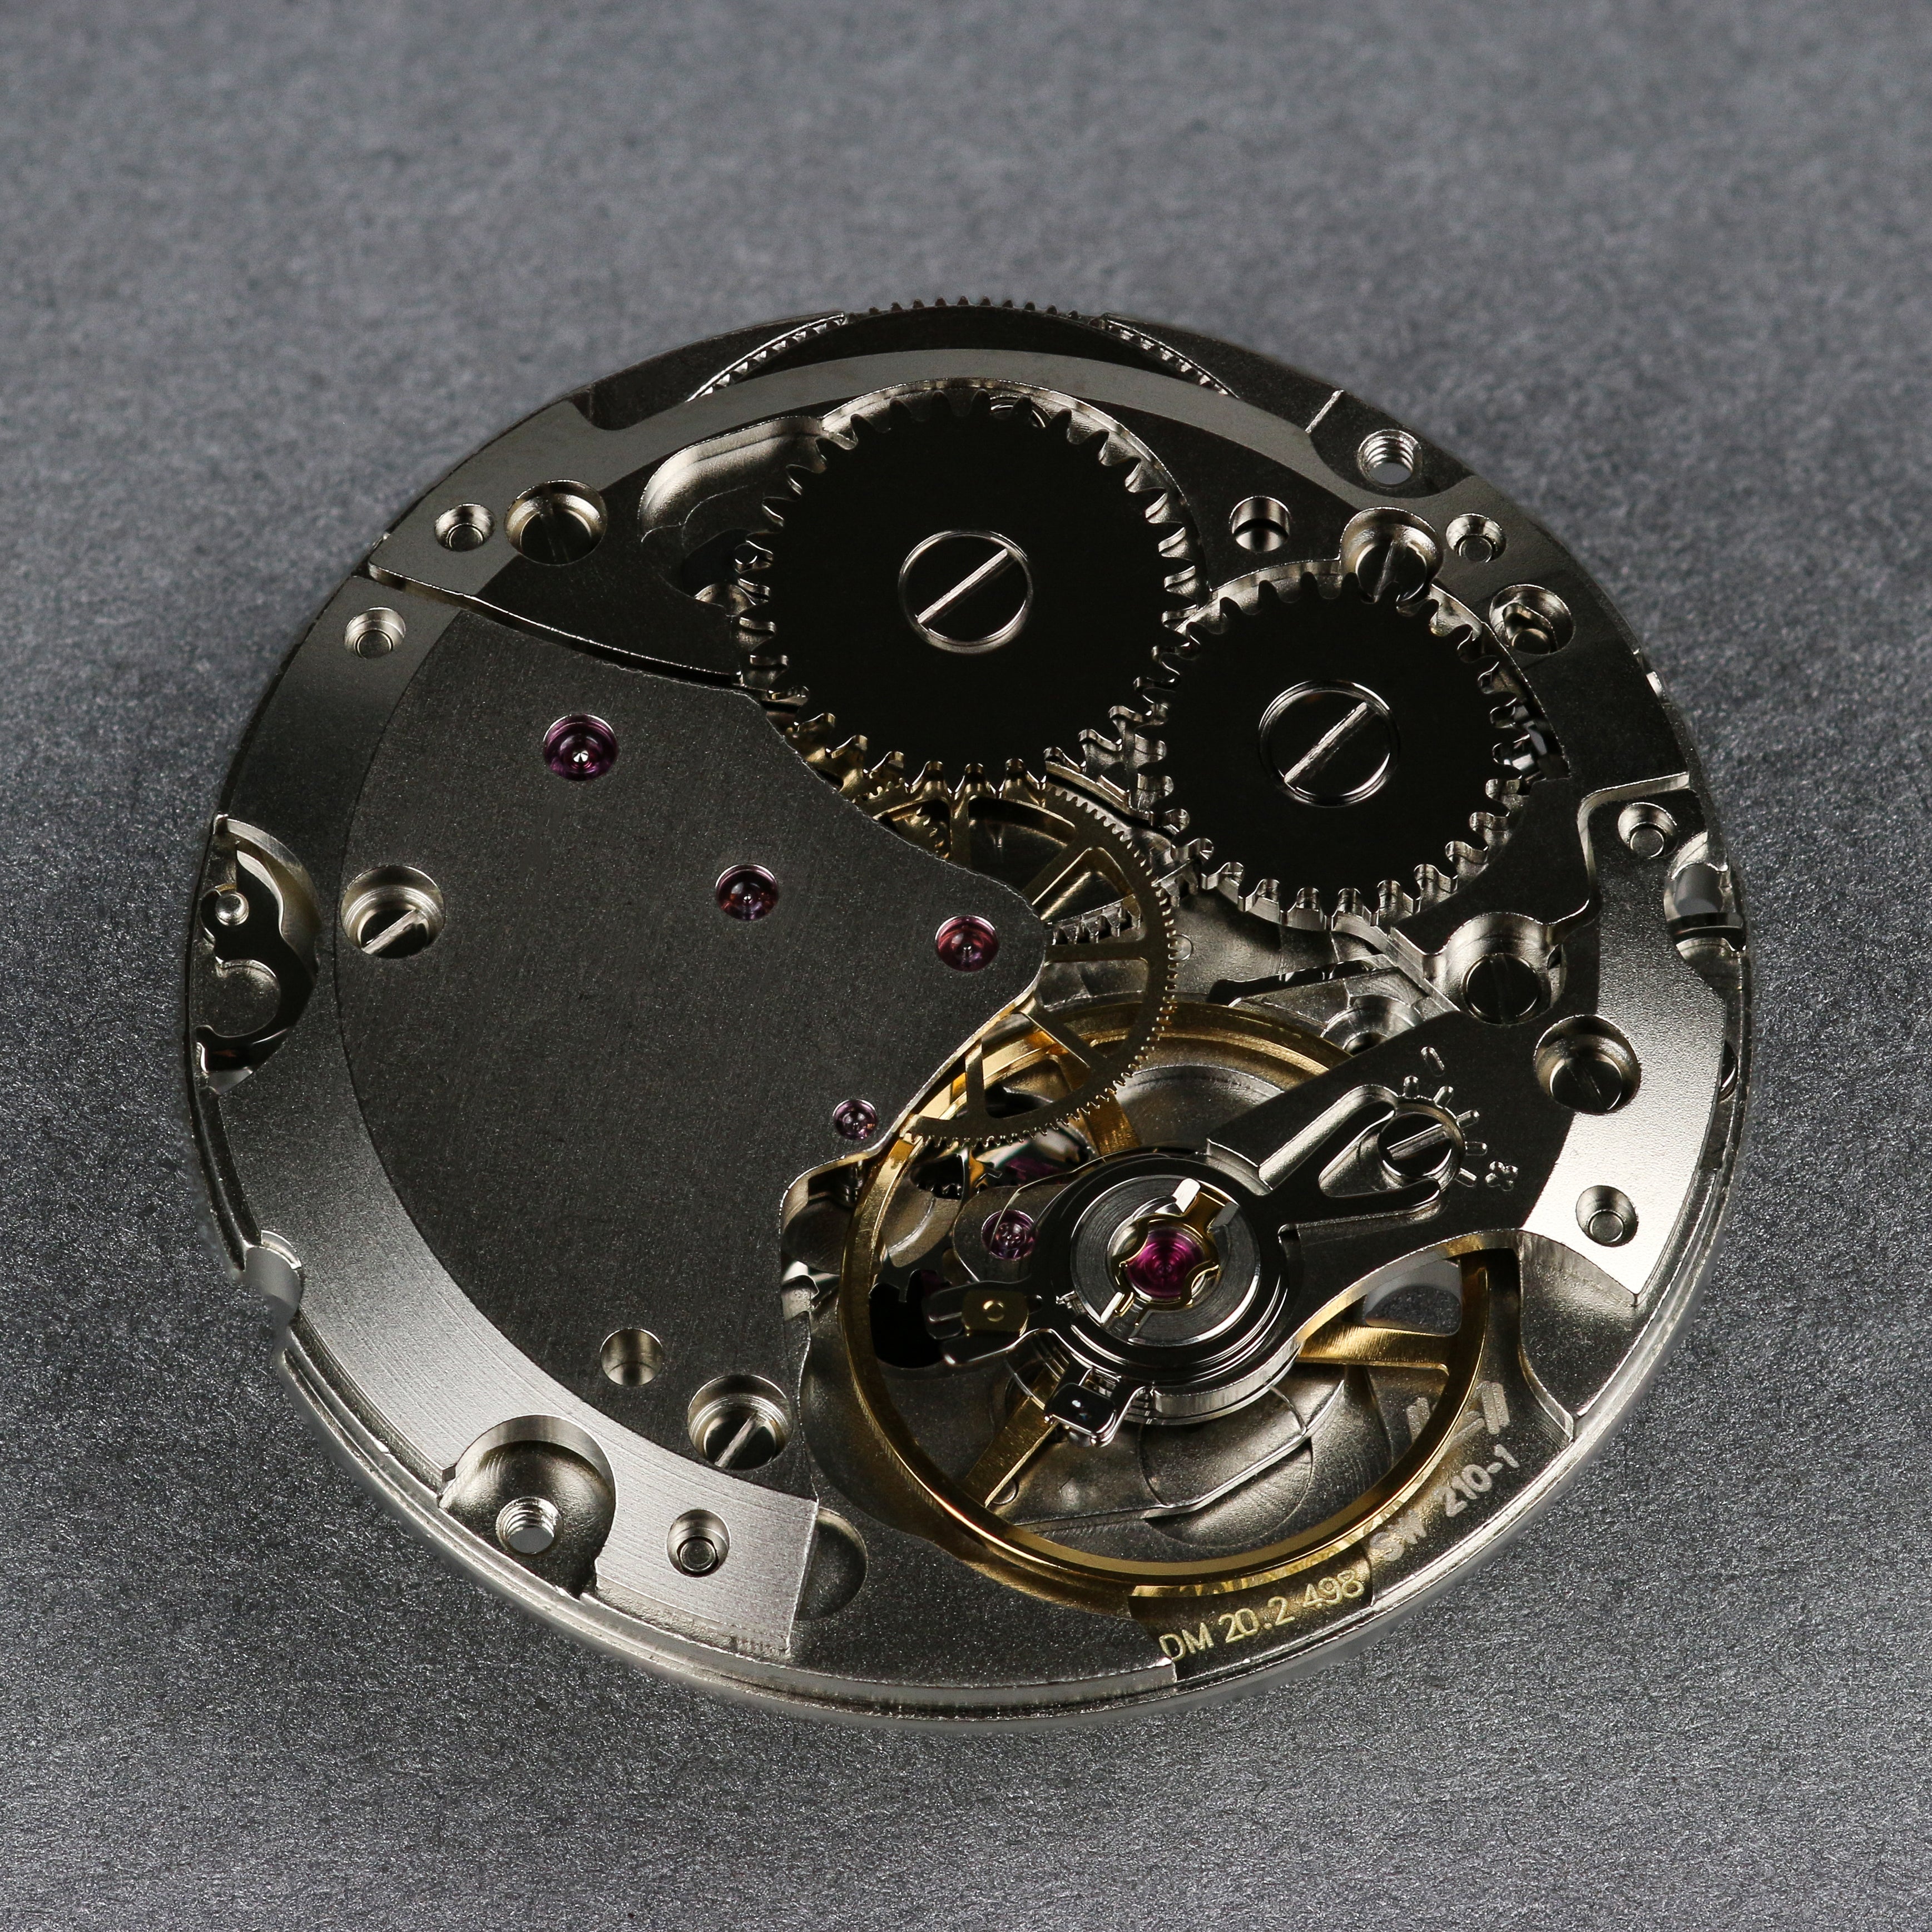 The Watch – Branch Horology